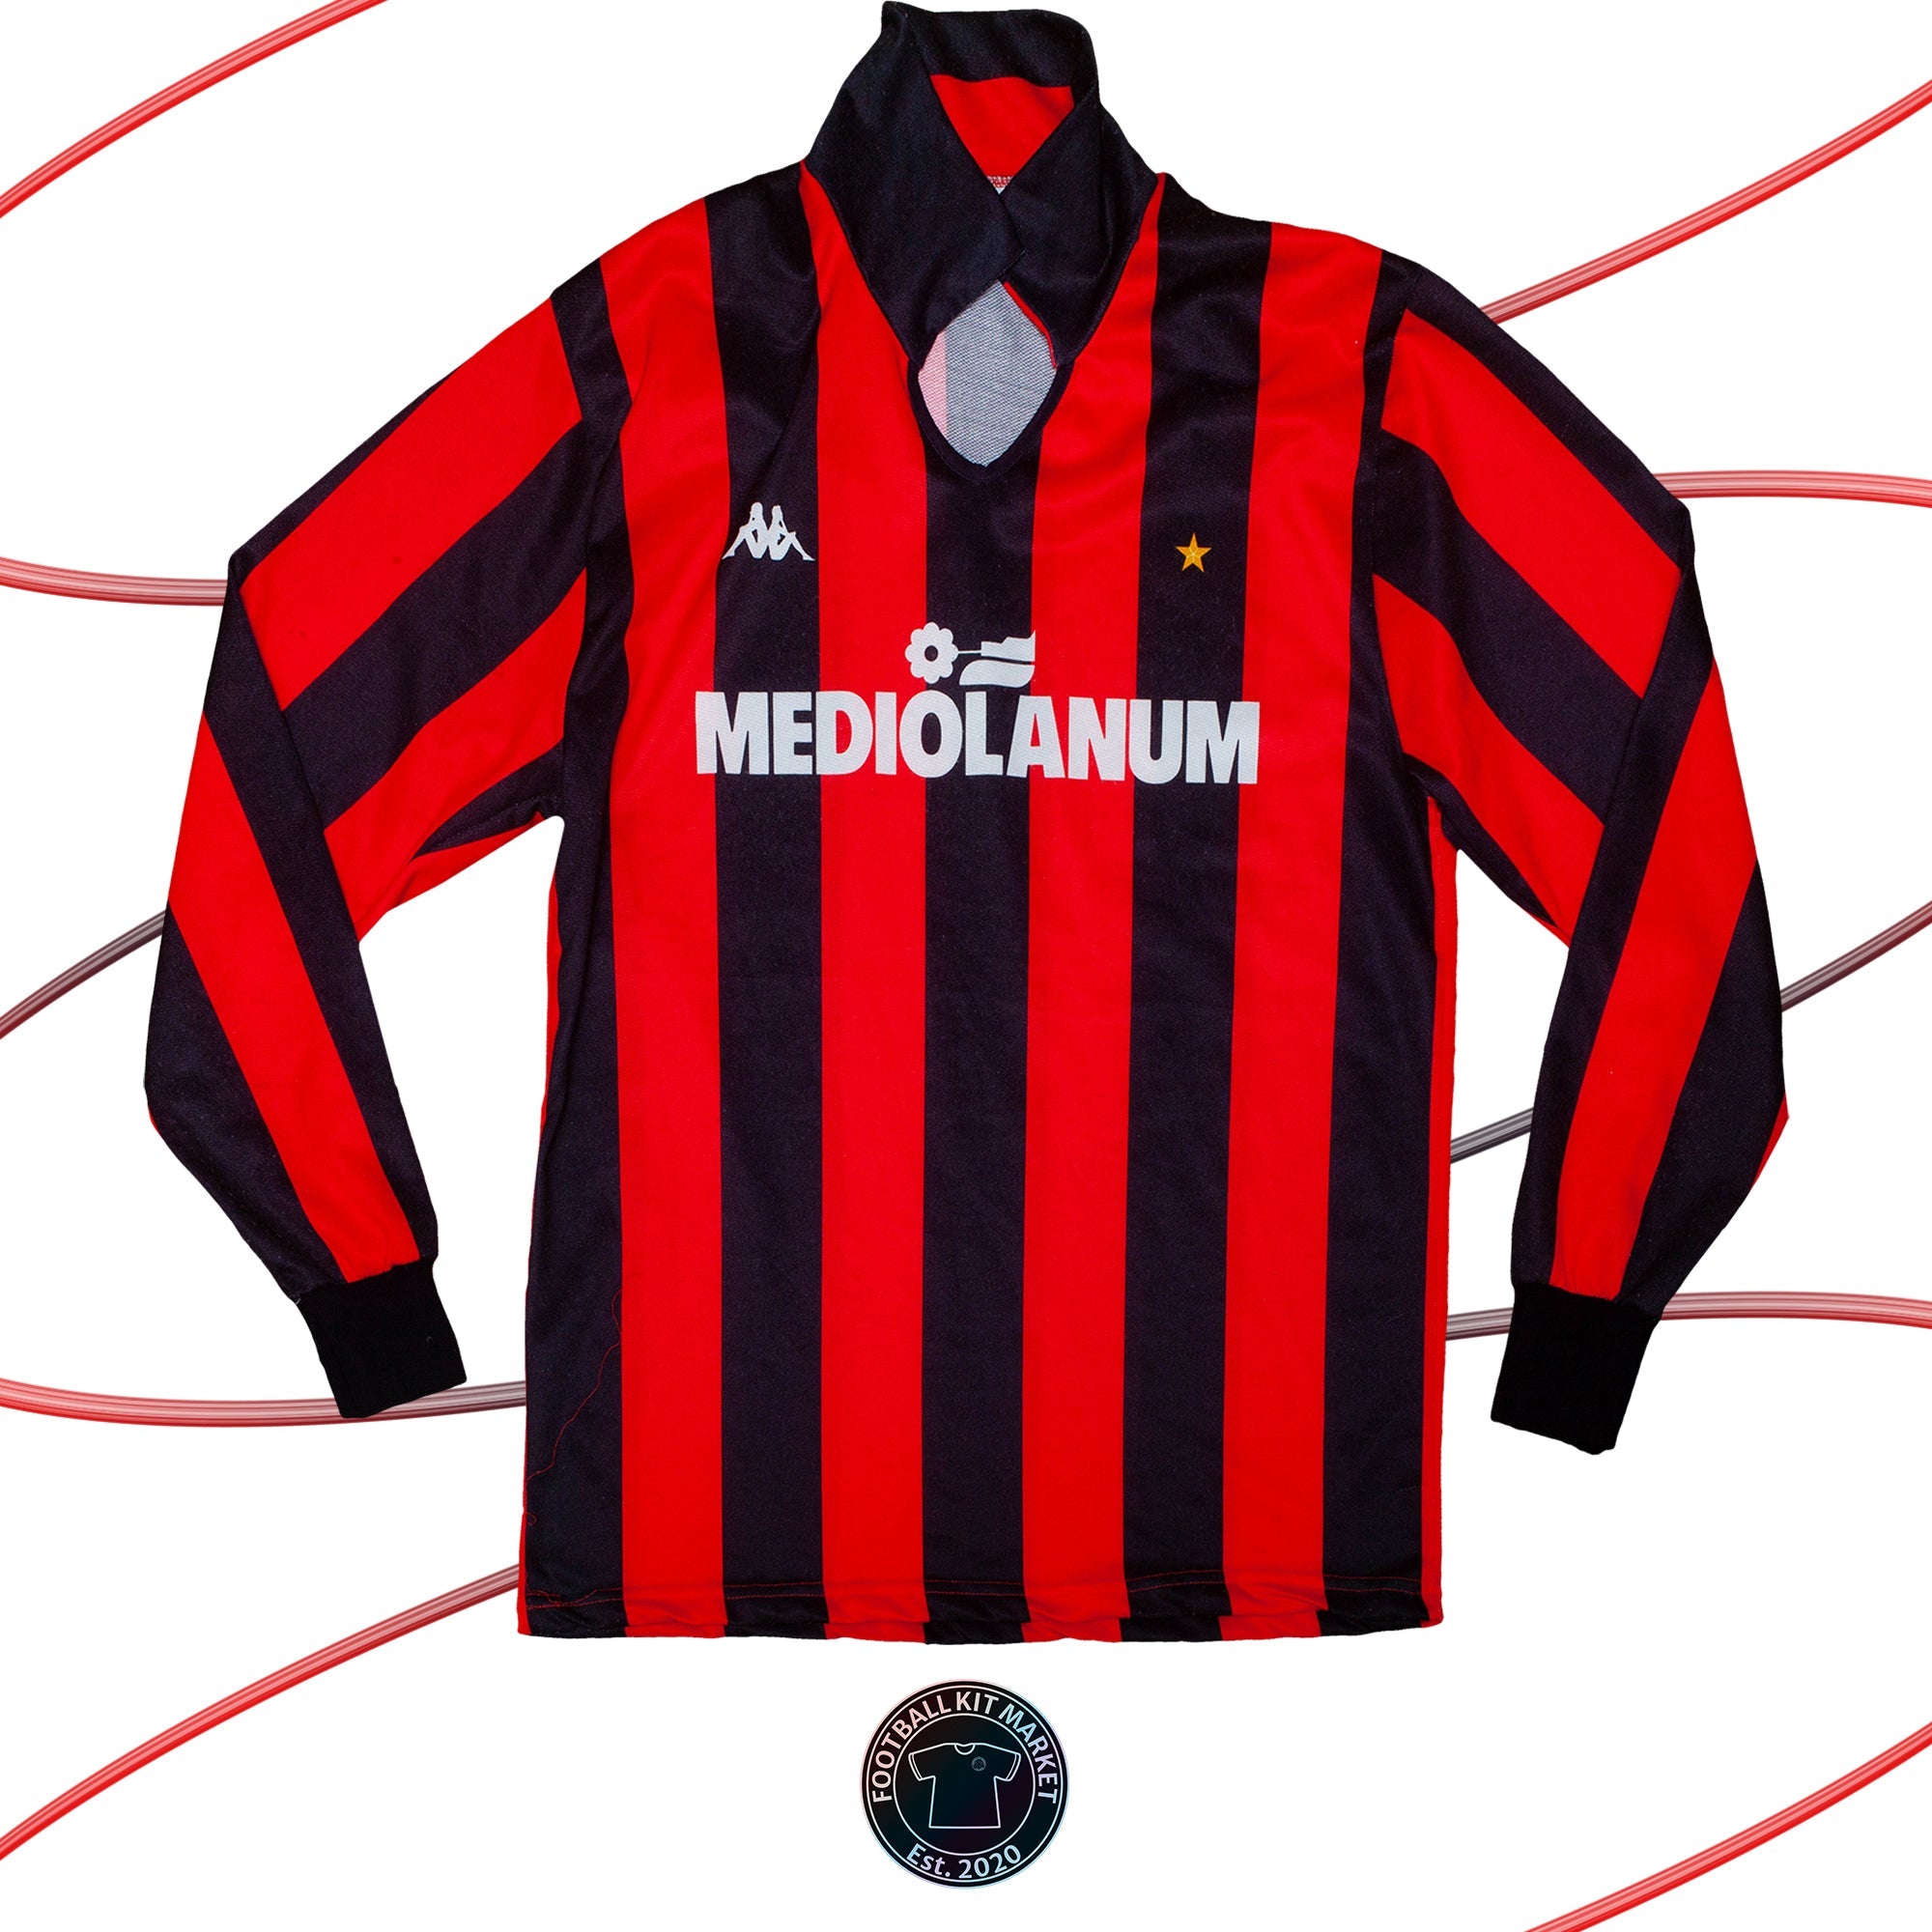 Genuine AC MILAN Home (1987-1988) - KAPPA (L) - Product Image from Football Kit Market